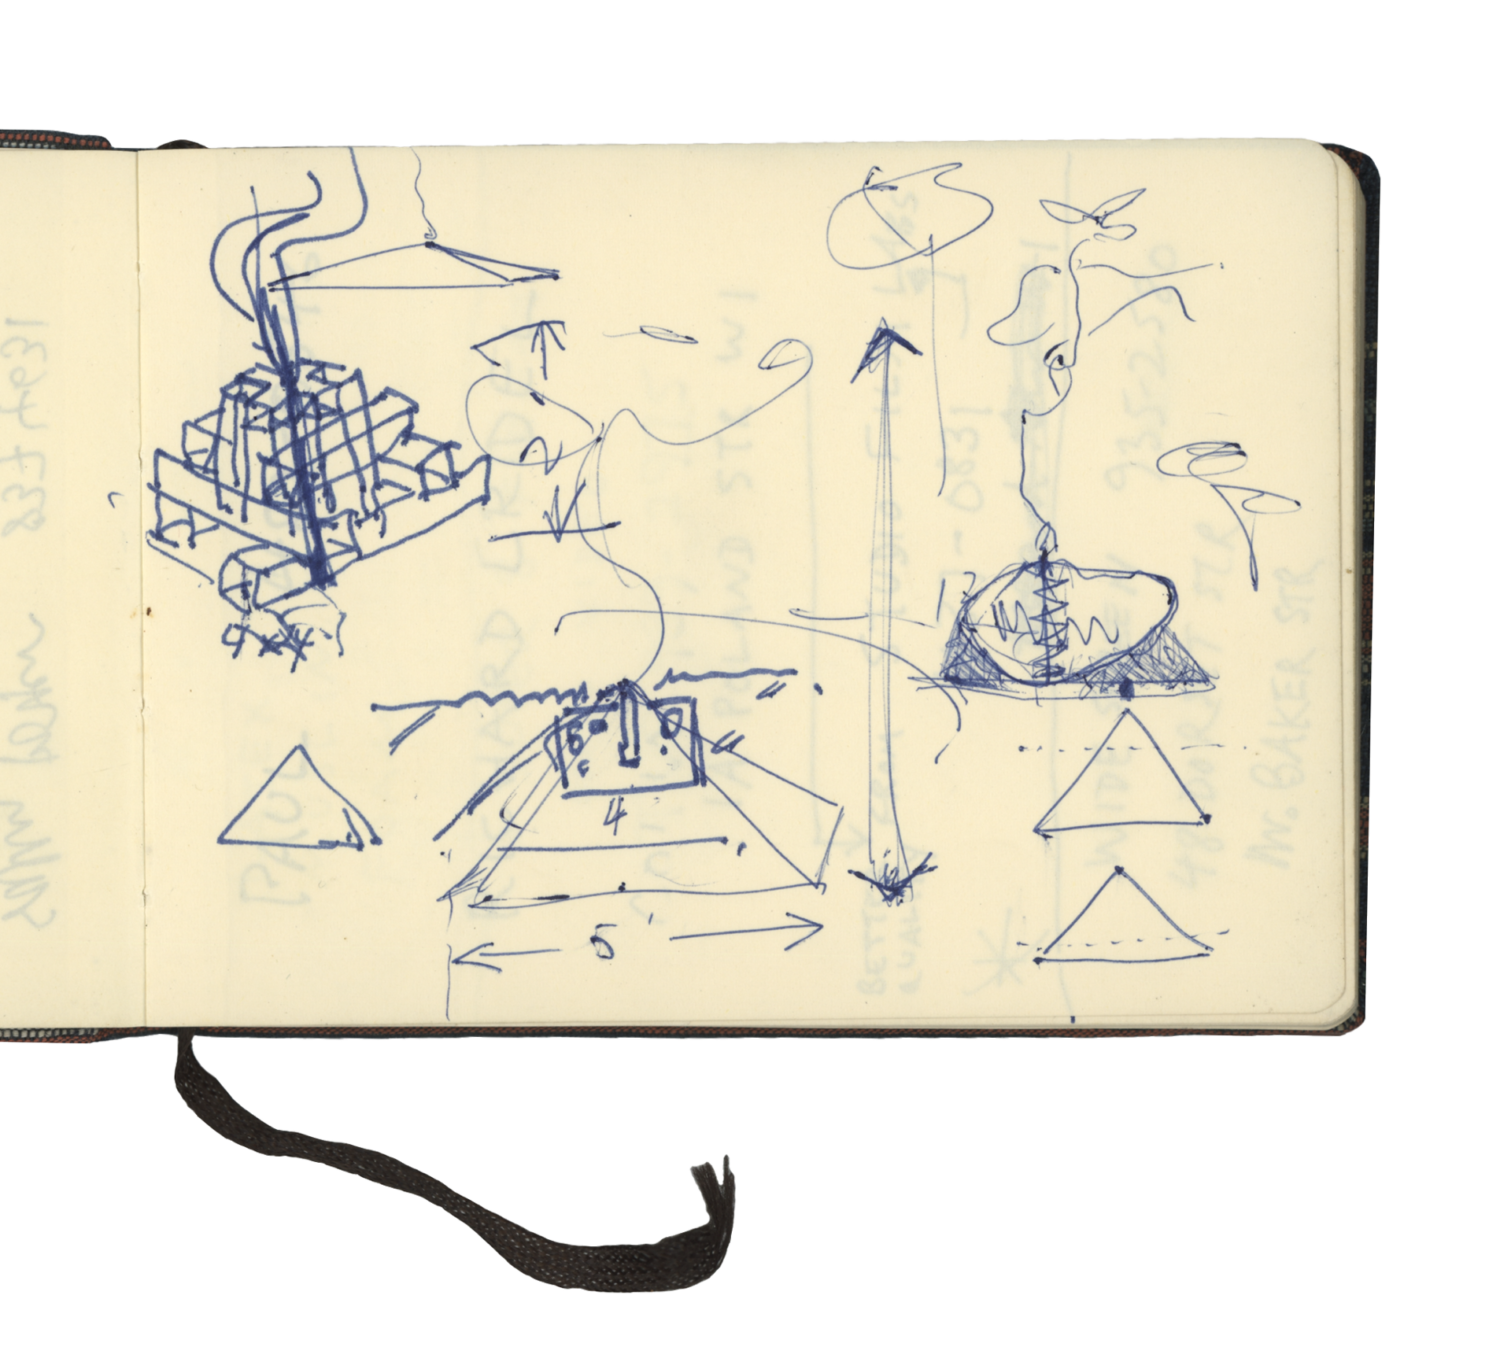 Sketch and notebook (c. 1998)